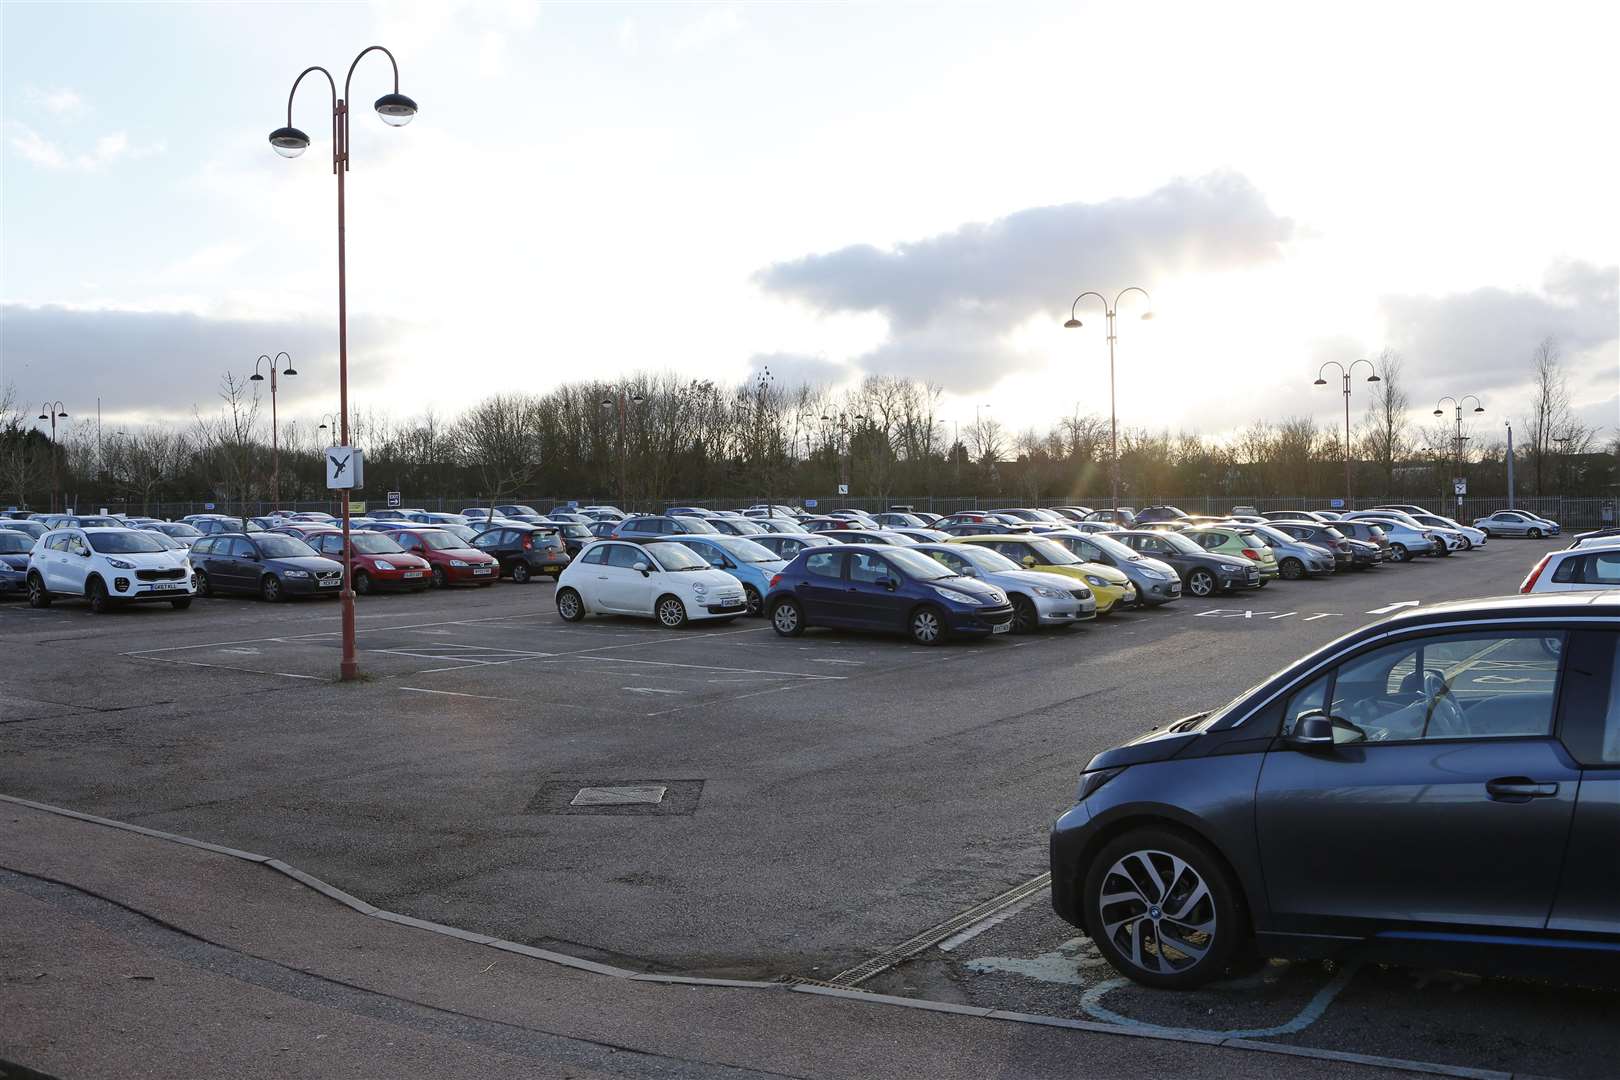 The current car park offers 600 spaces